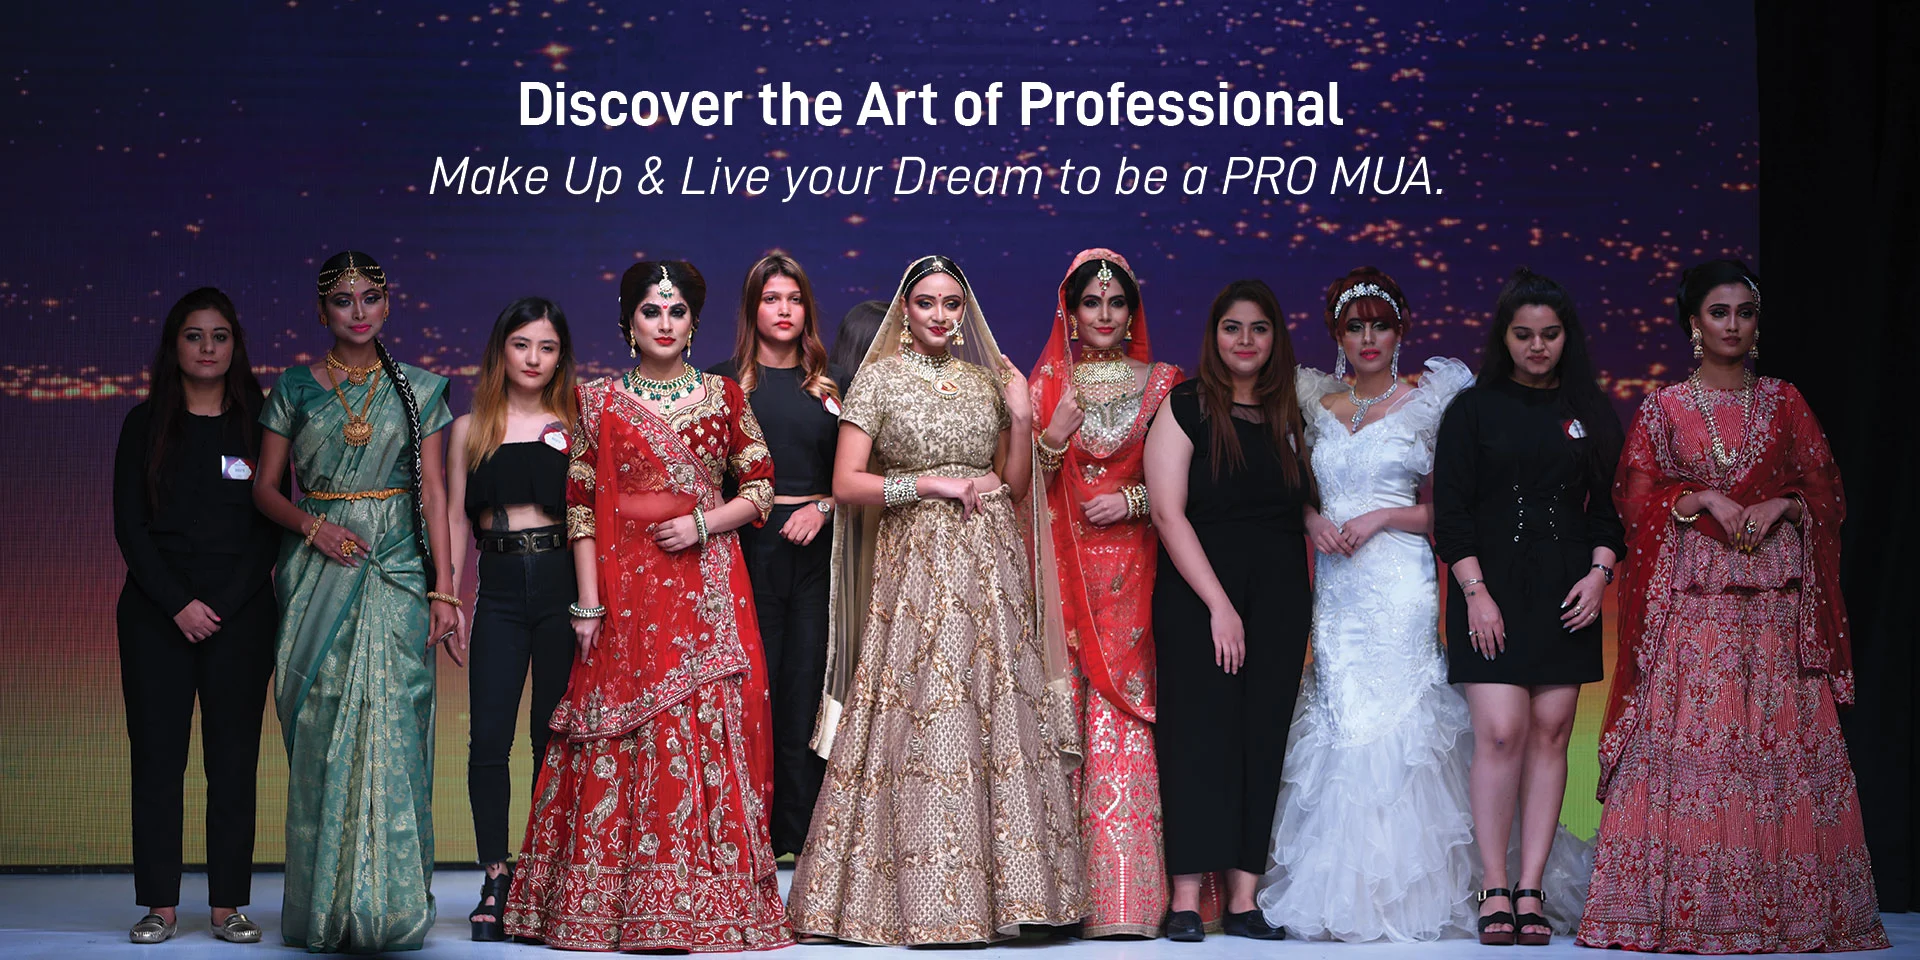 Discover the art of professional